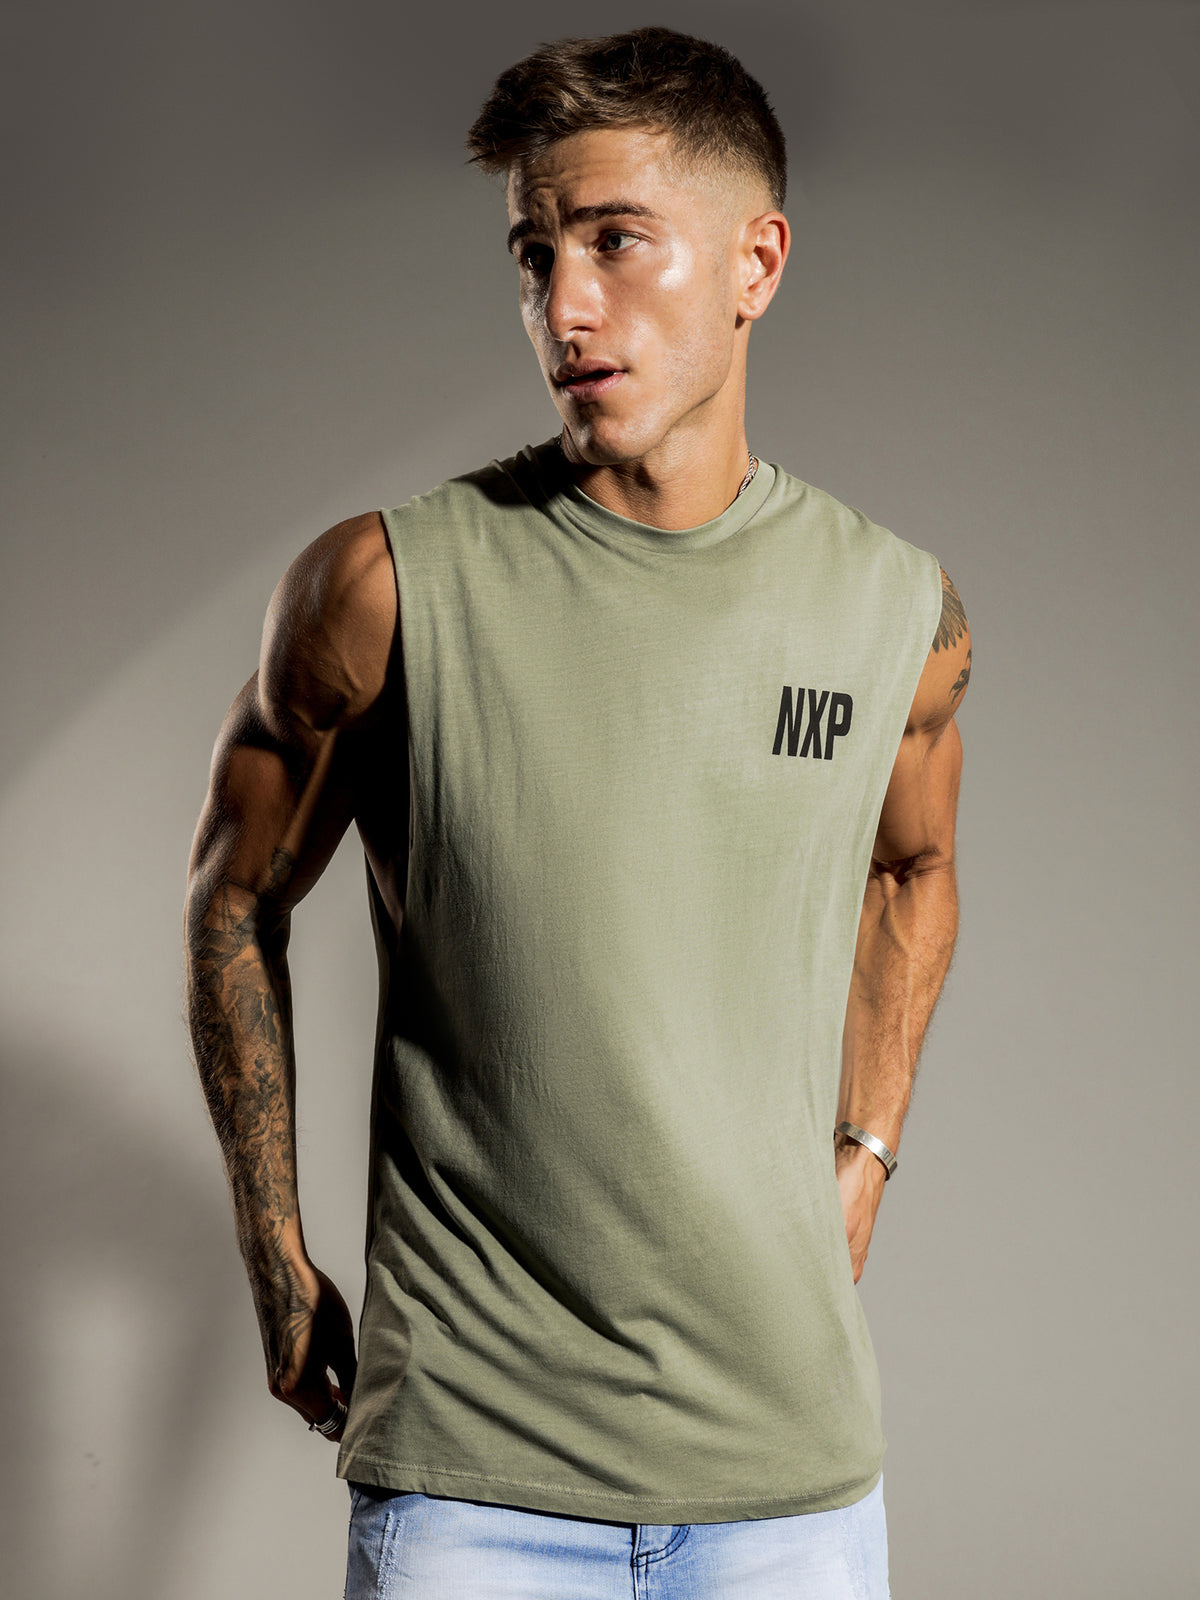 Opposites Cape Back Muscle T-Shirt in Pigment Khaki